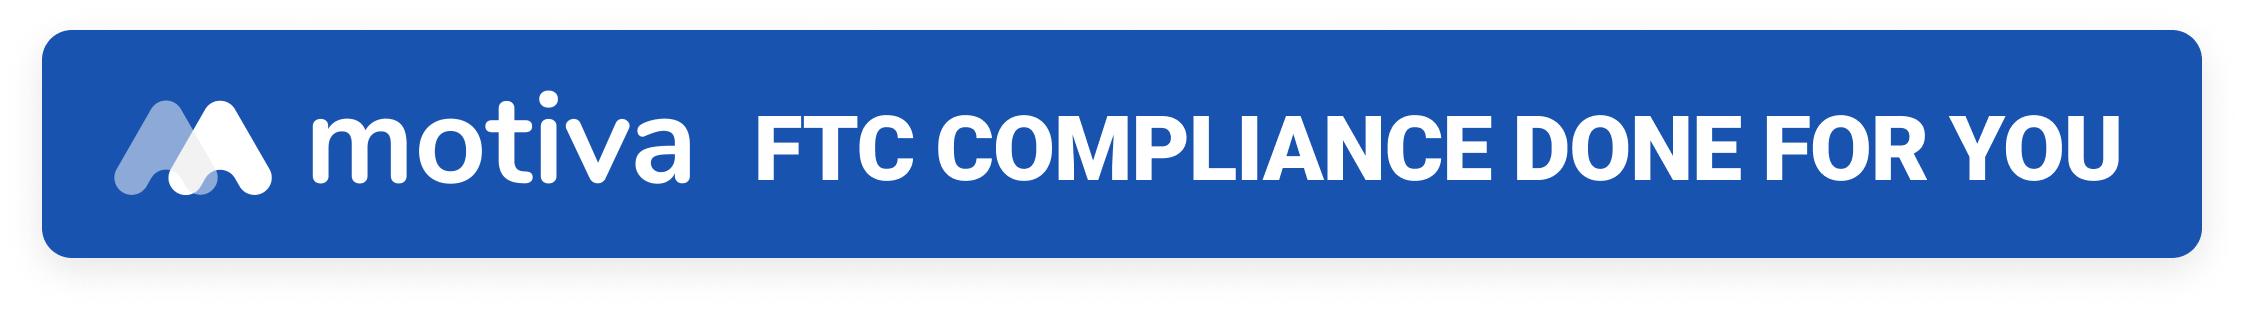 FTC COMPLIANCE DONE FOR YOU